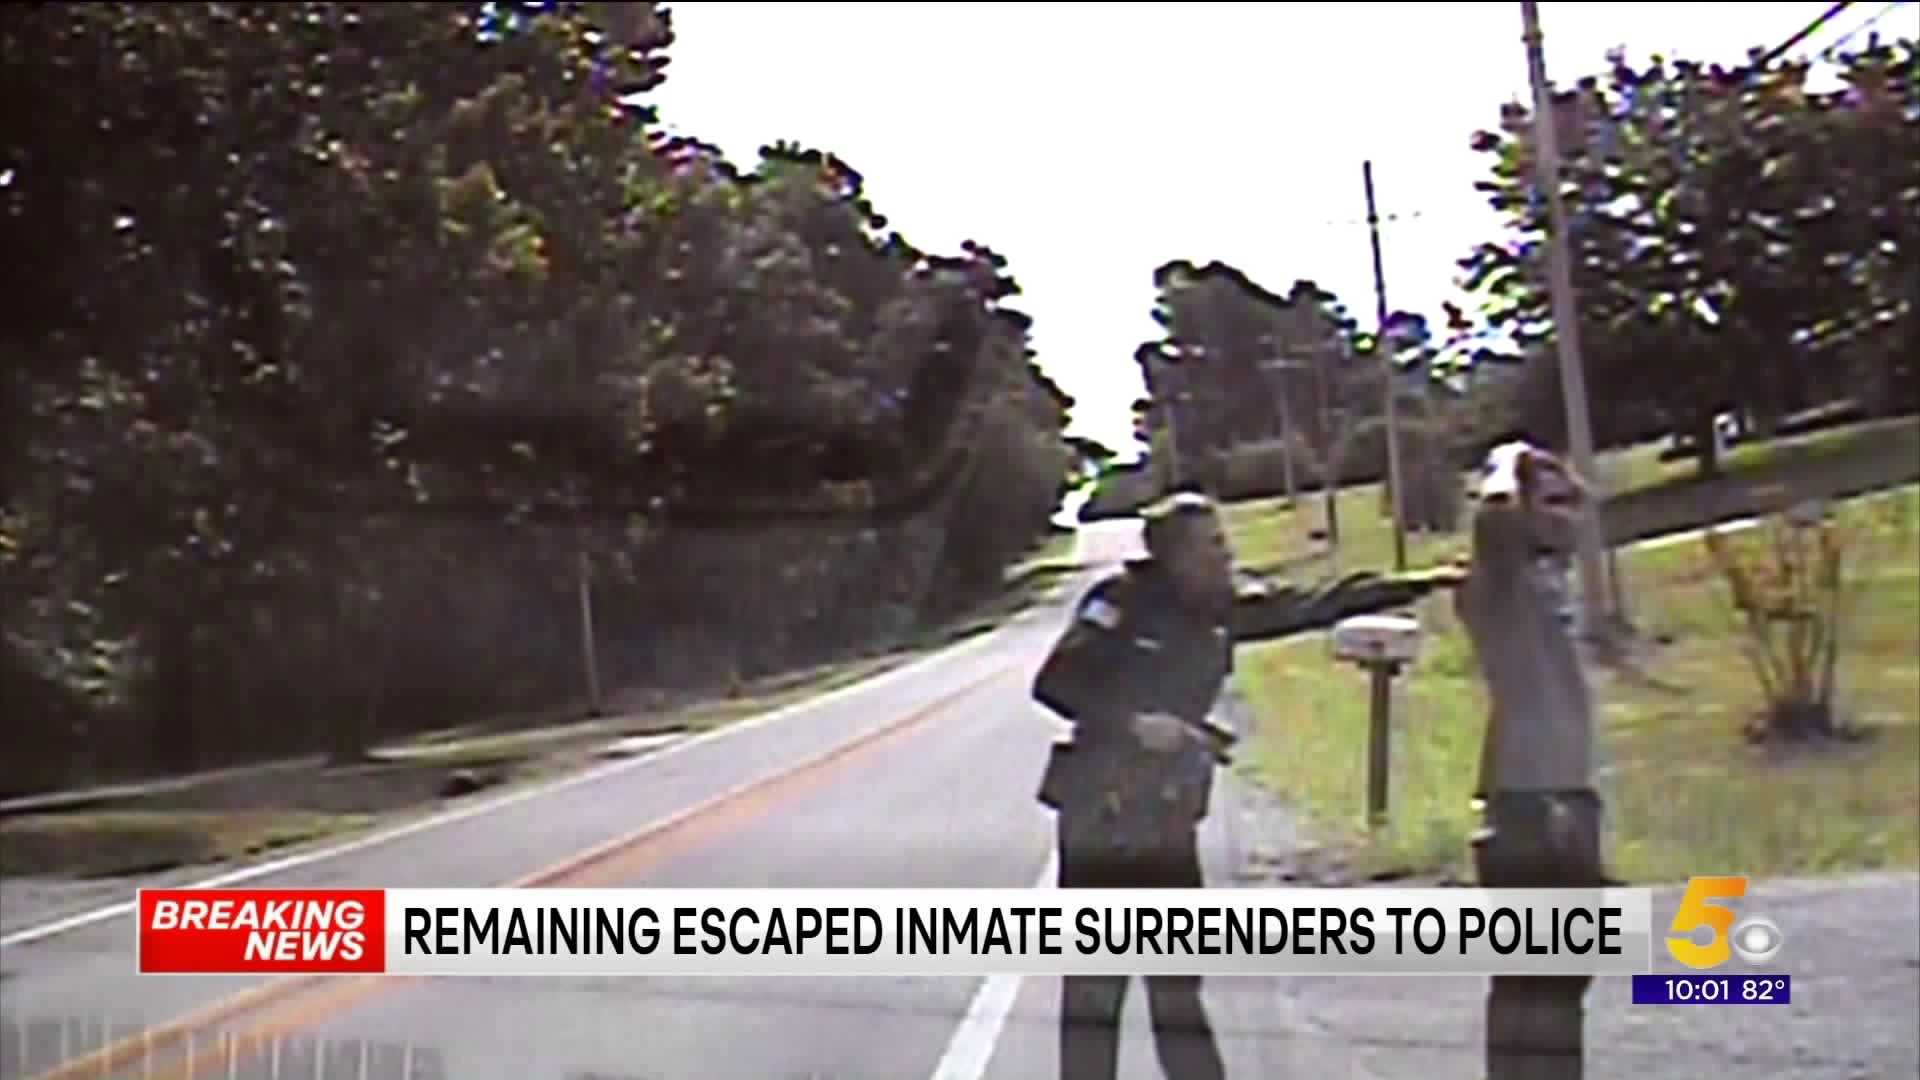 Remaining Escaped Inmate Surrenders to Police